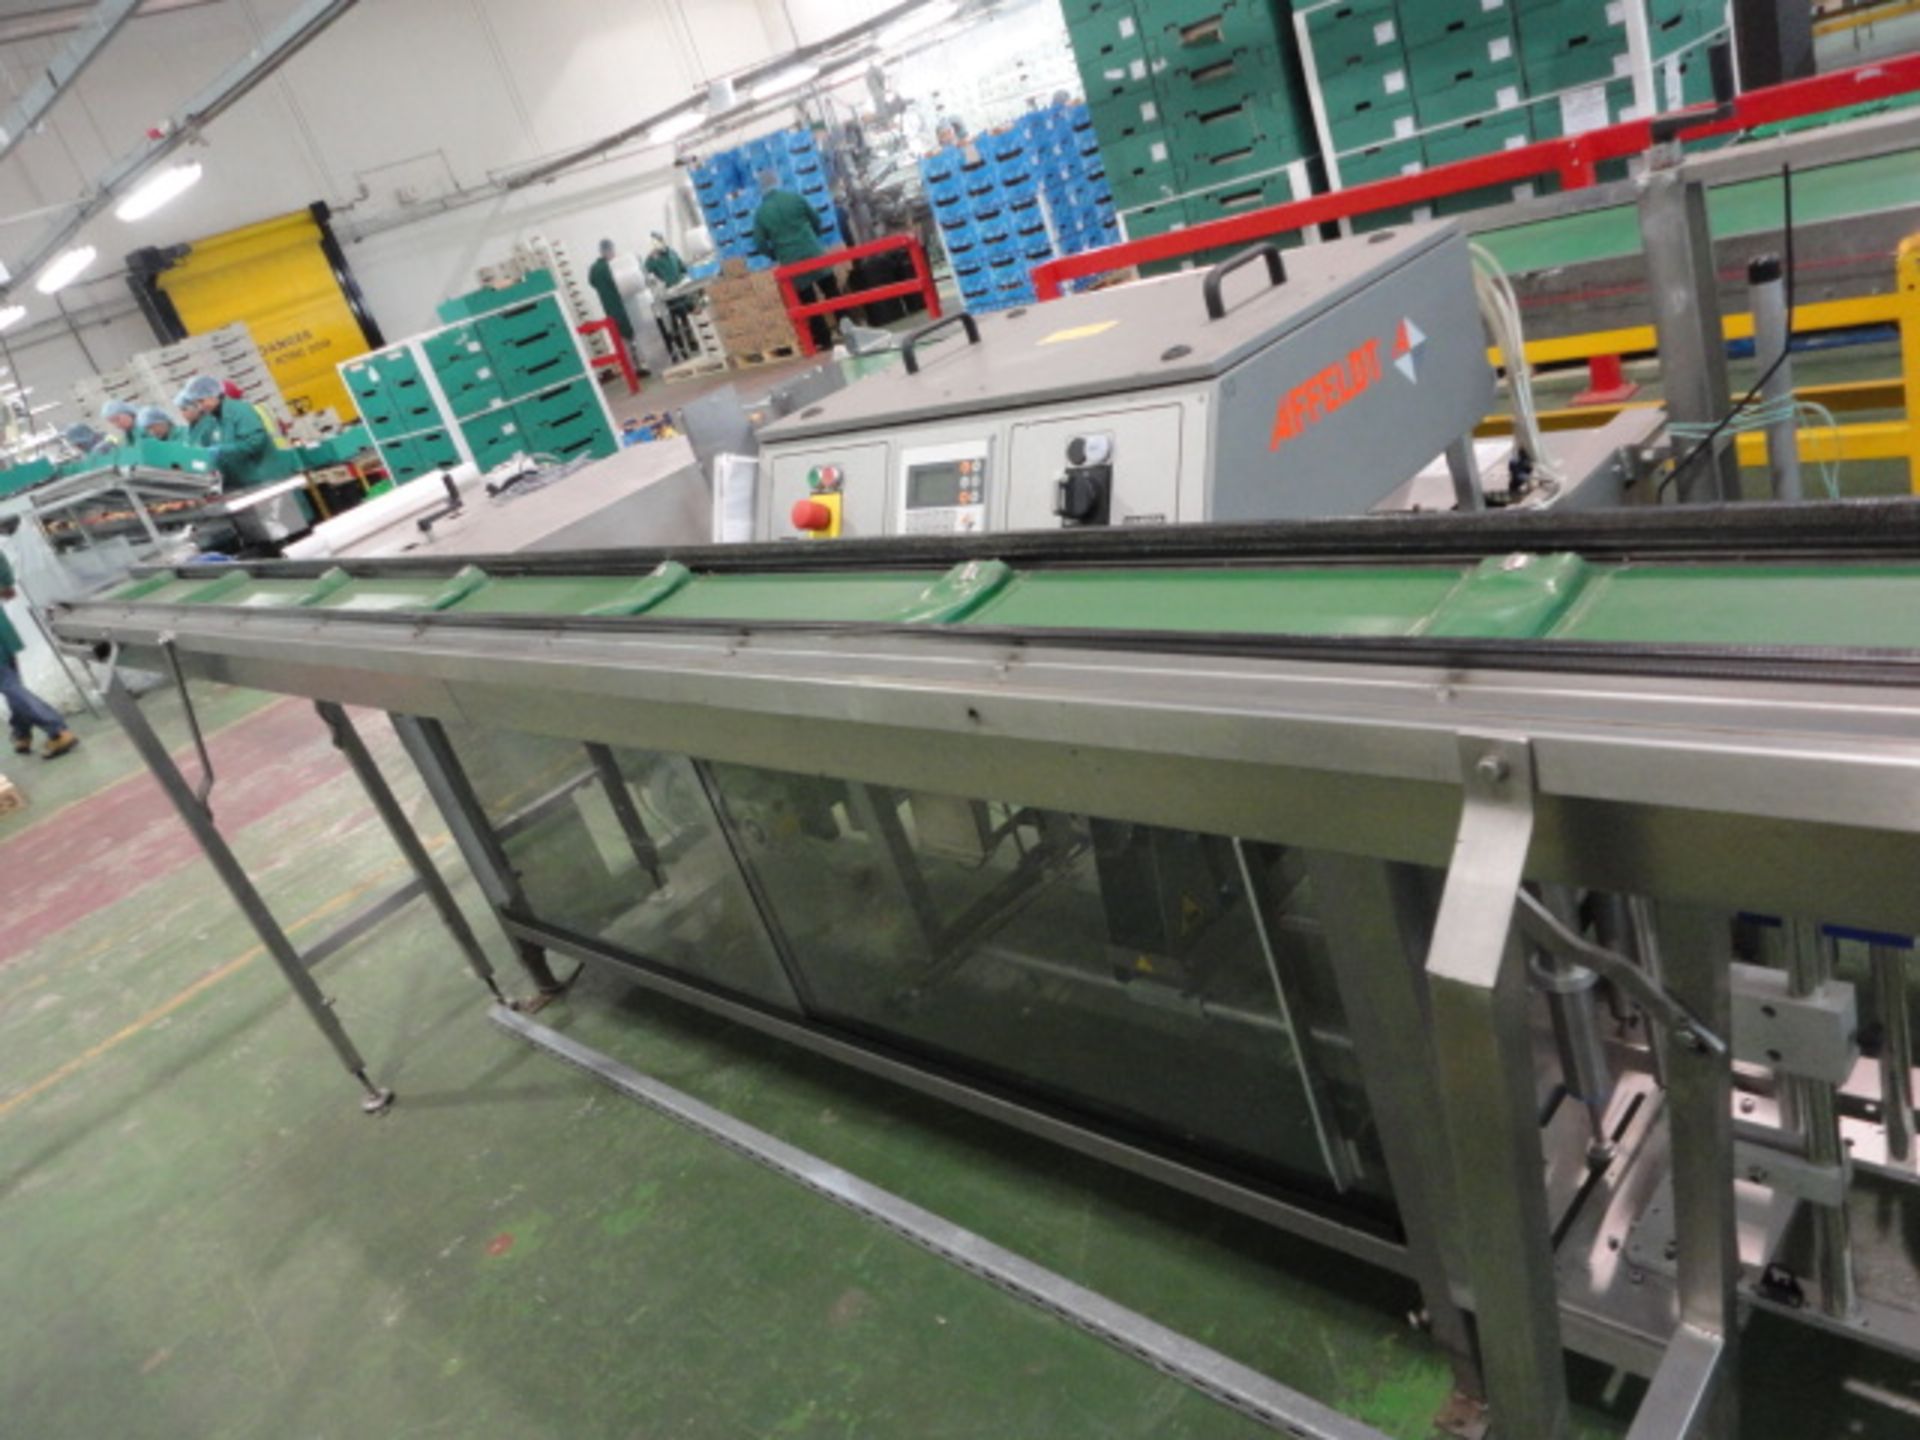 Affeldt model AVN 691 apple bagging machine with infeed conveyor approx. 4150mm long x 170mm wide - Image 3 of 6